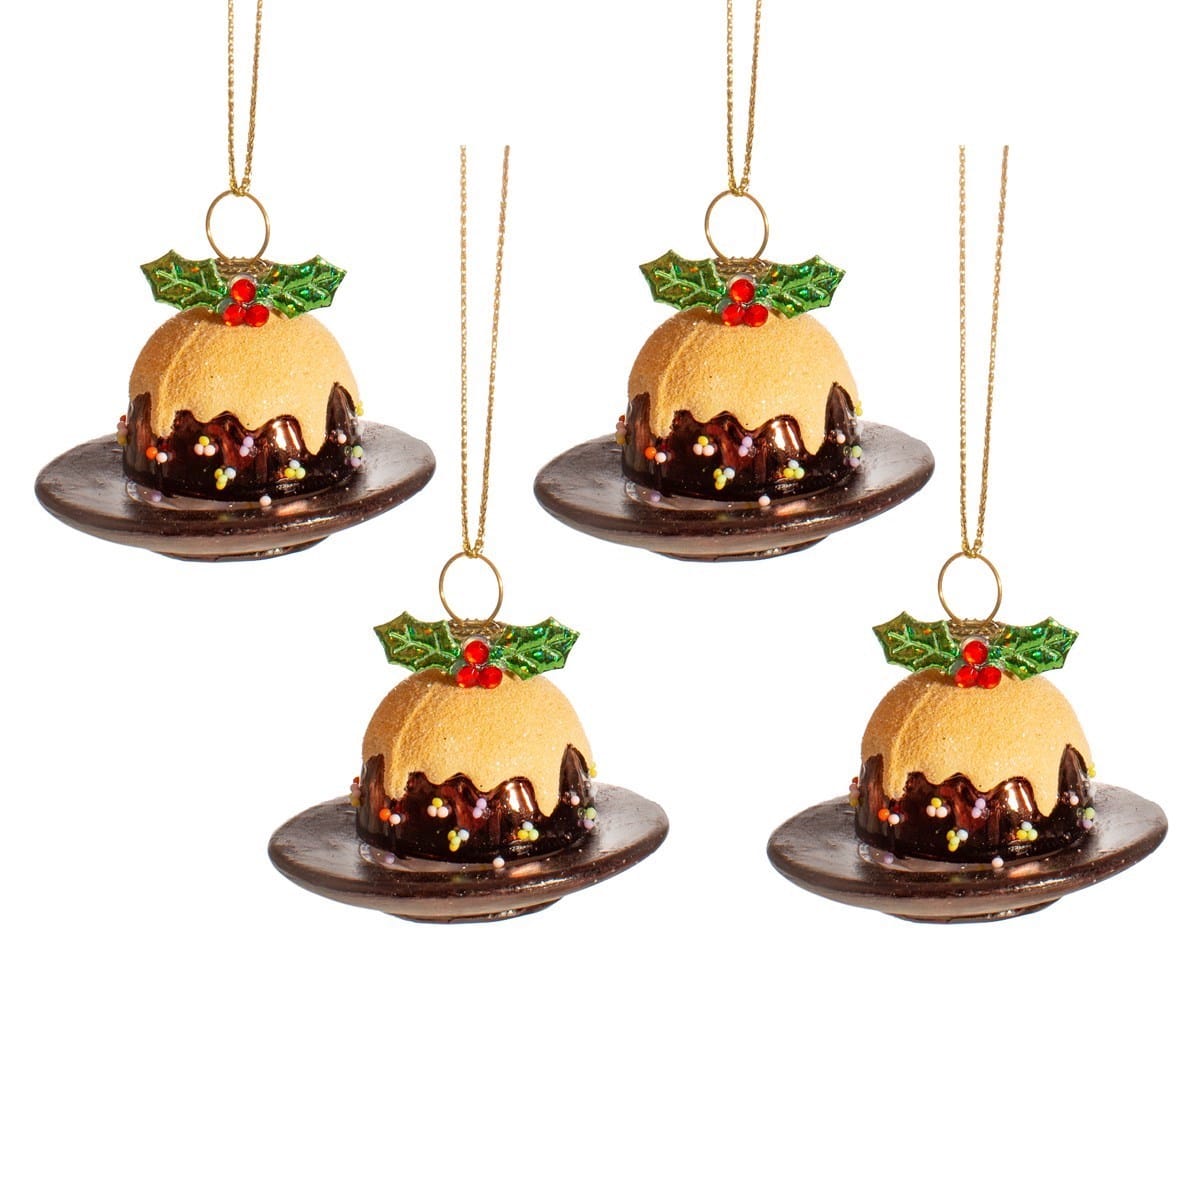 Sass & Belle Christmas Decorations Set of 4 Christmas Pudding Decorations